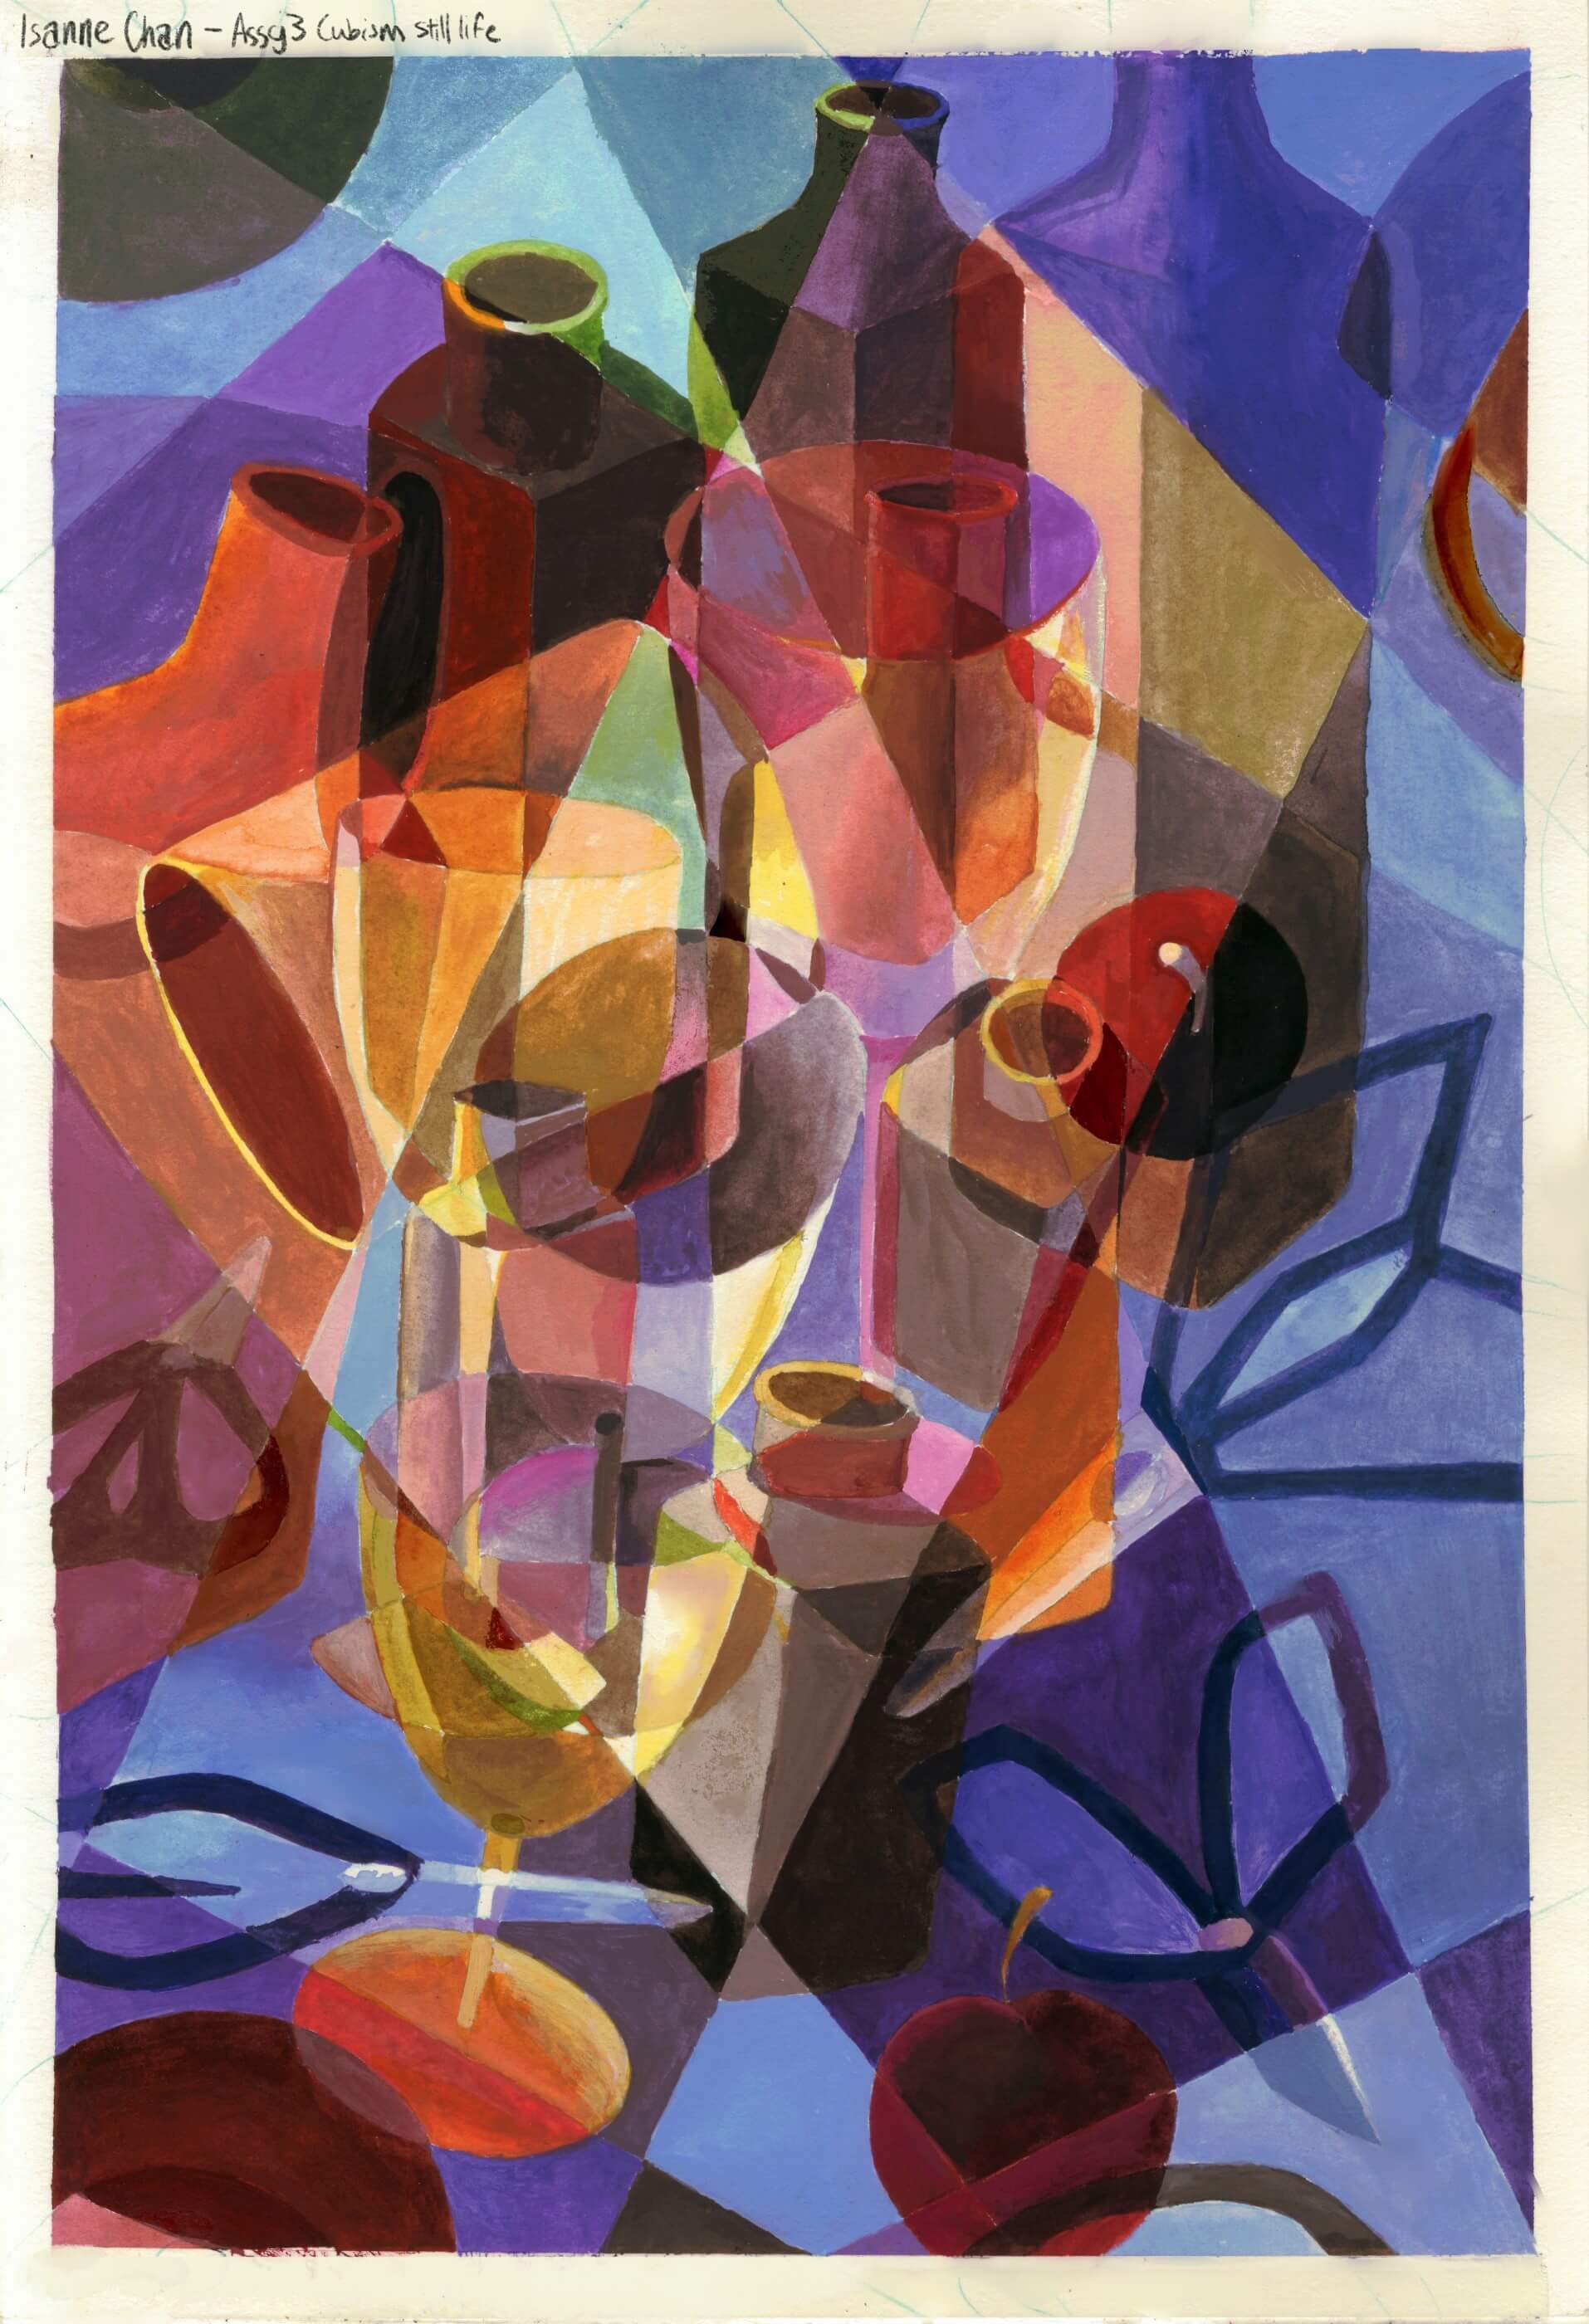 Cubist style traditional painting of glass wares